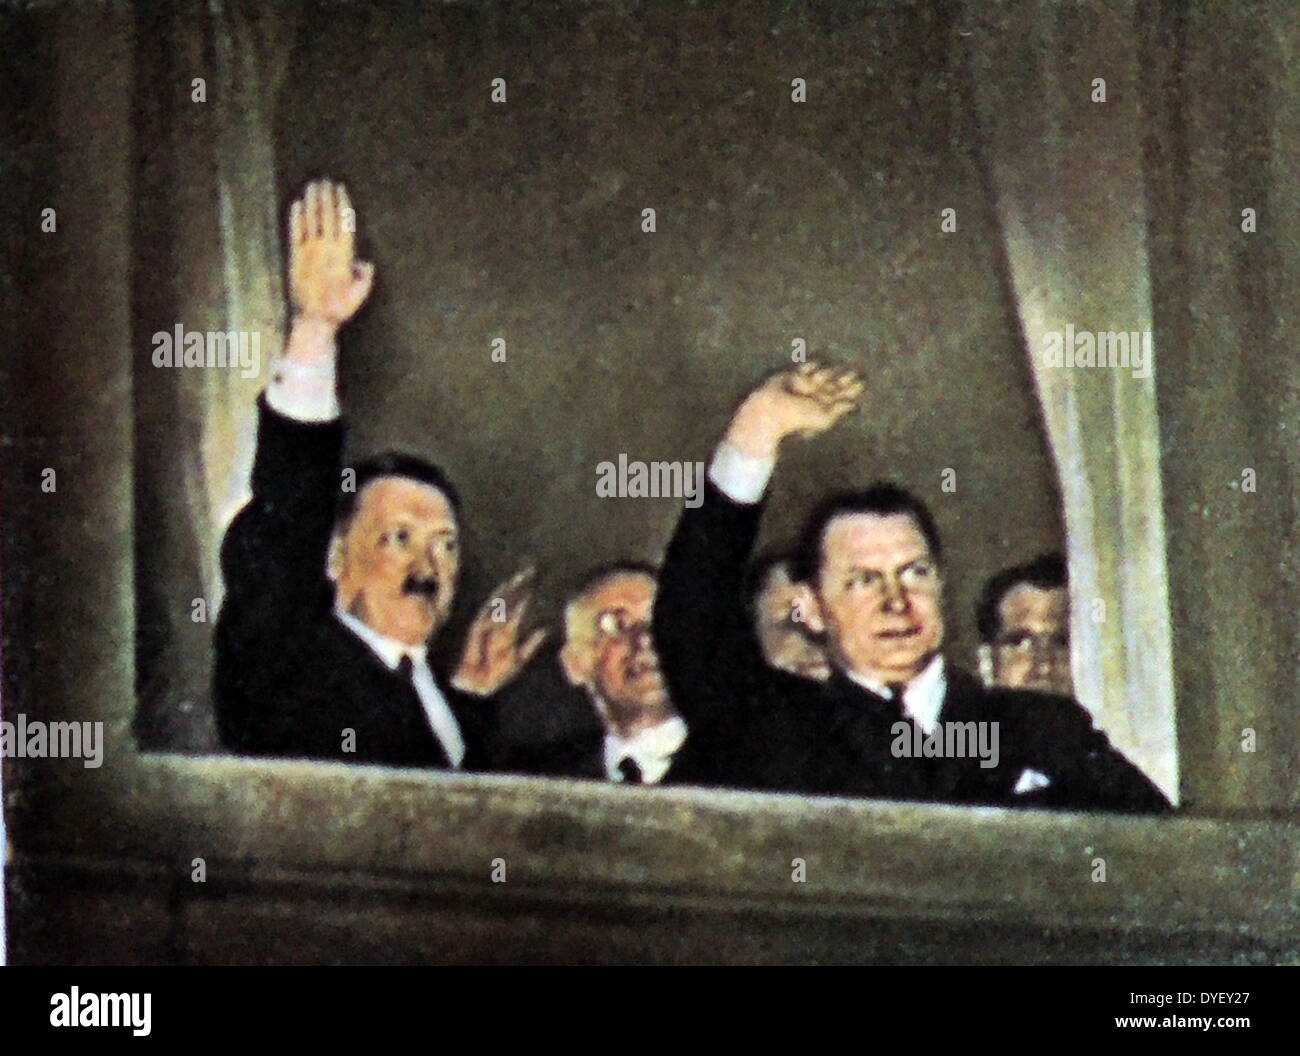 Herman Goring Right and Adolf Hitler left wave to supporters from a window at the Reichs Chancellor's office after Hitler was appointed Chancellor of Germany in 1933. Rudolf Hess later Hitler's deputy is depicted at the far right. Stock Photo